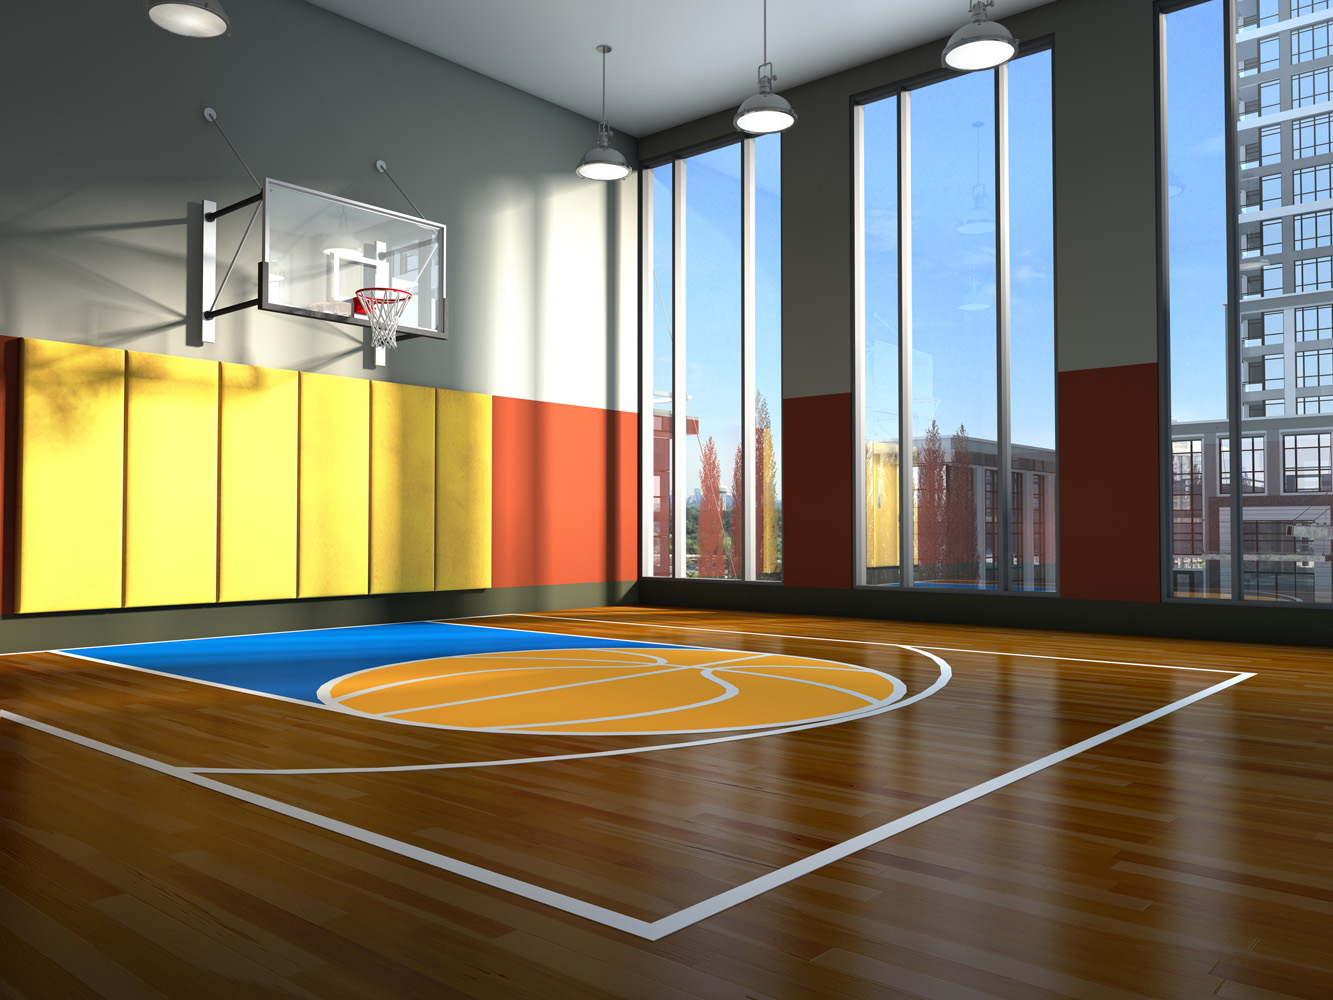 Interior Amenity Rendering - Basketball Court 3D Architectural Rendering